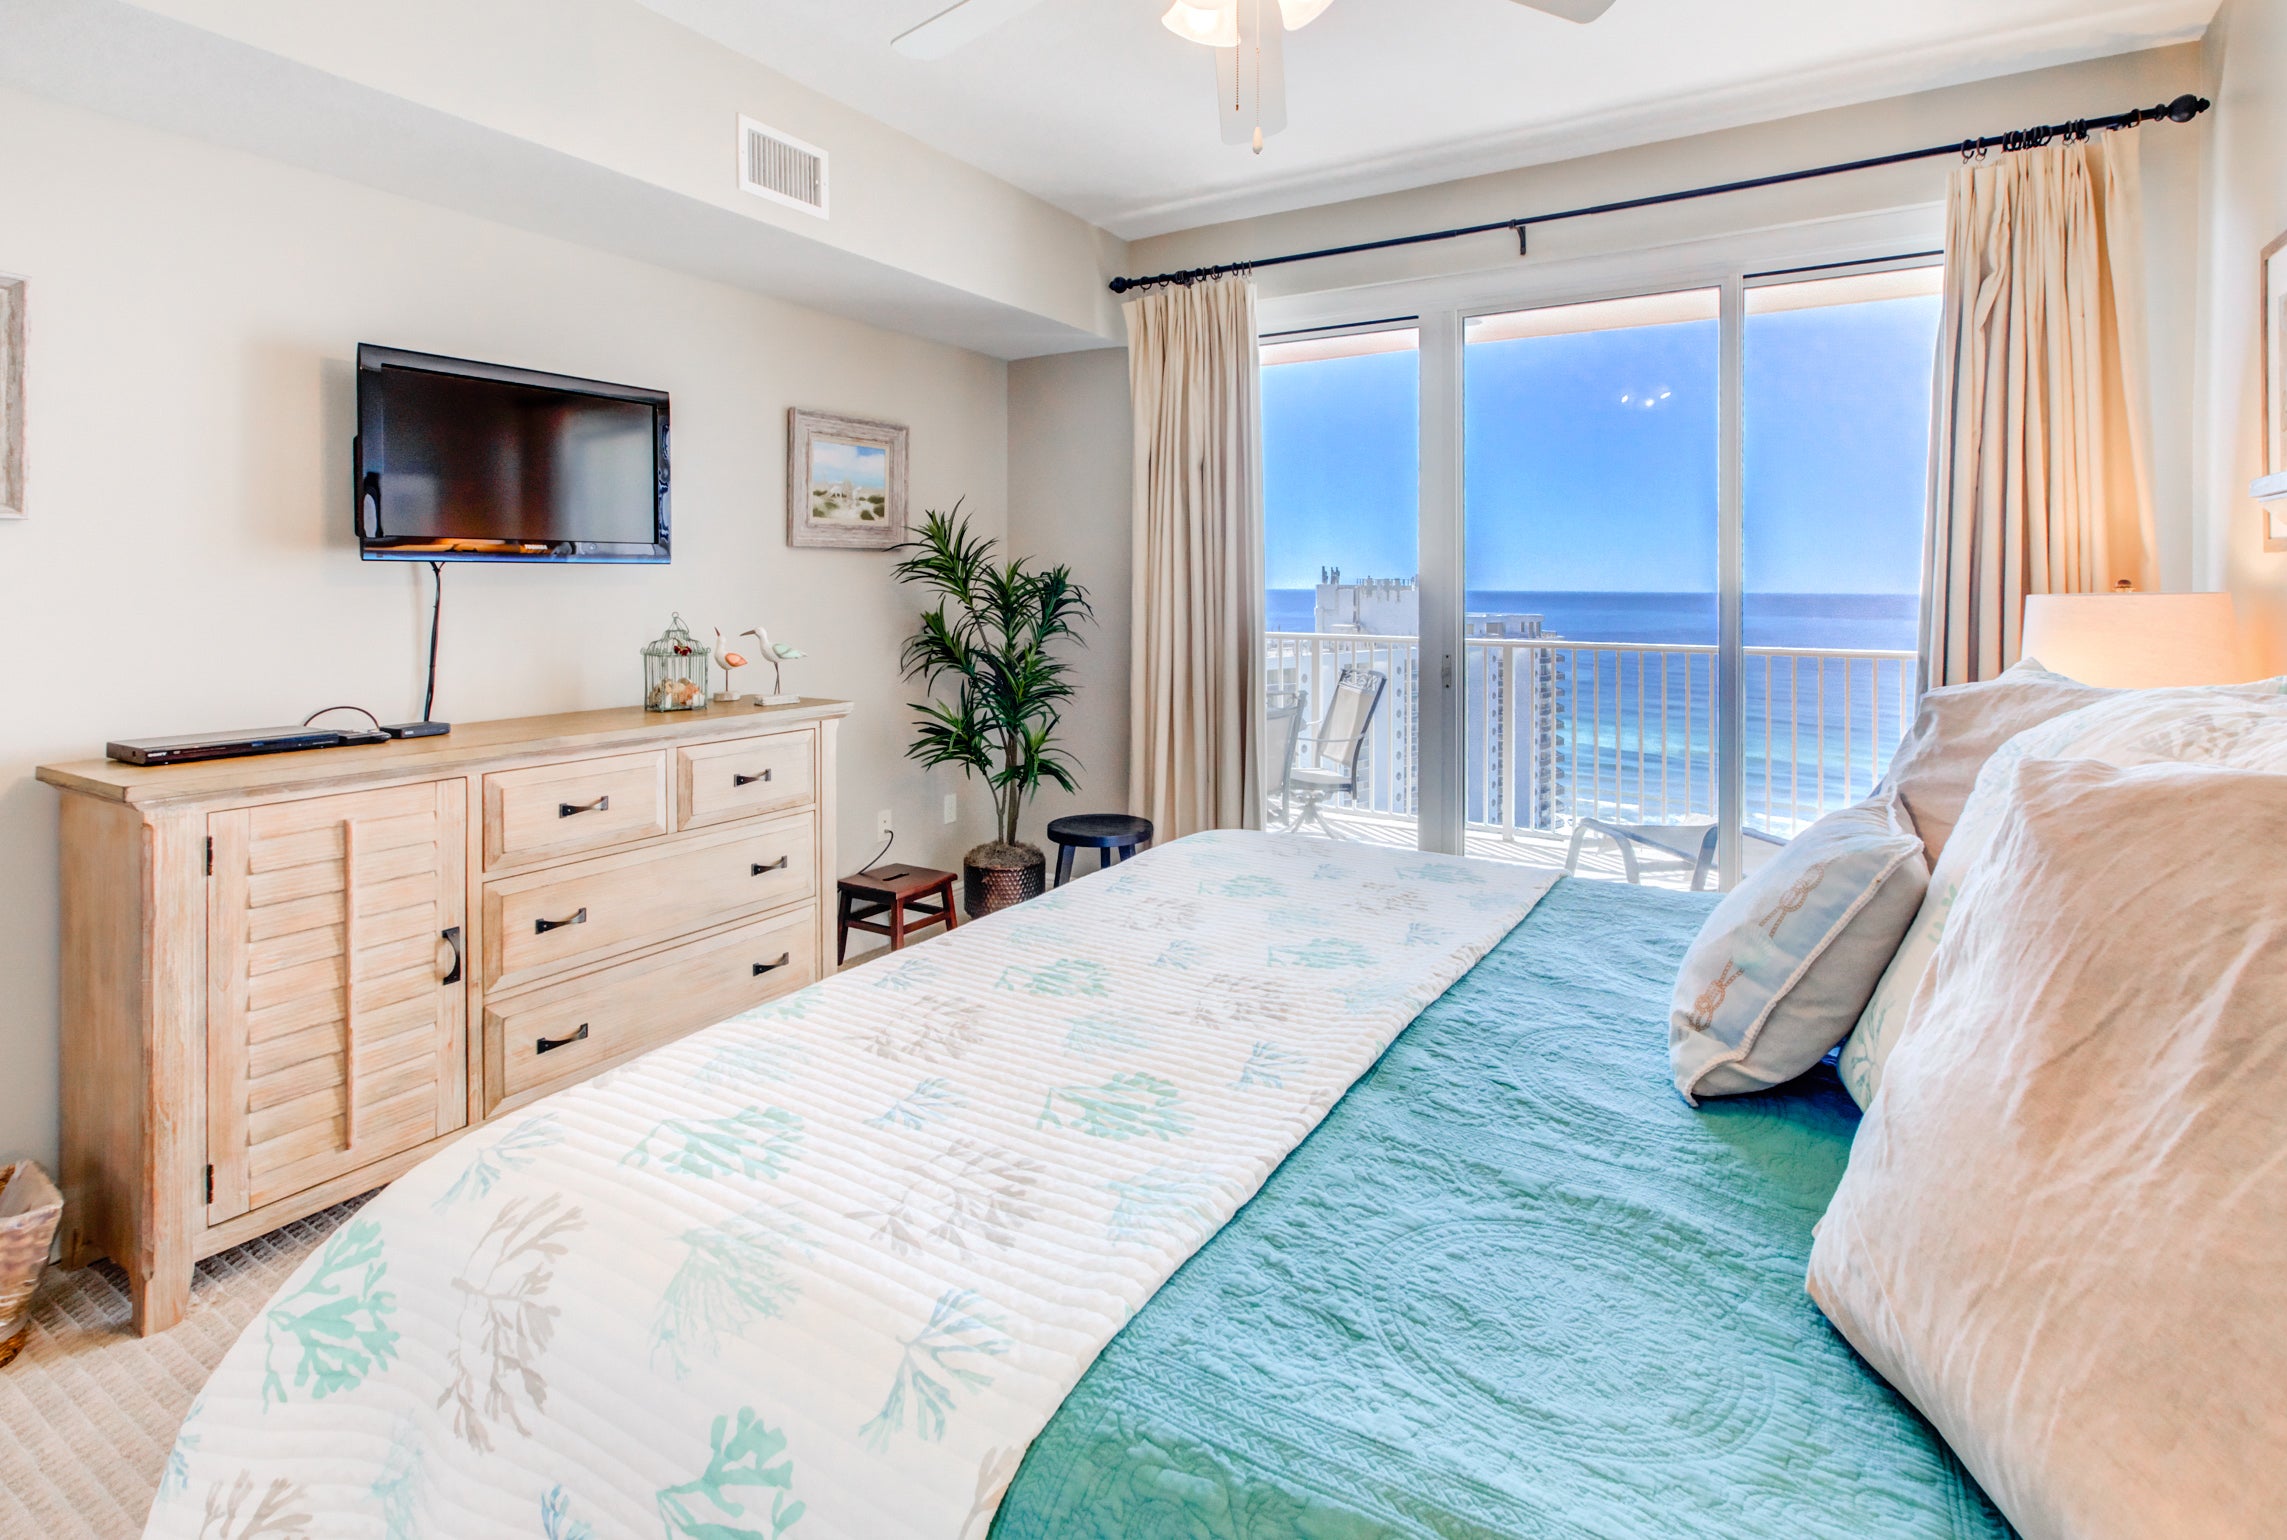 Spectacular Views from the Master Suite